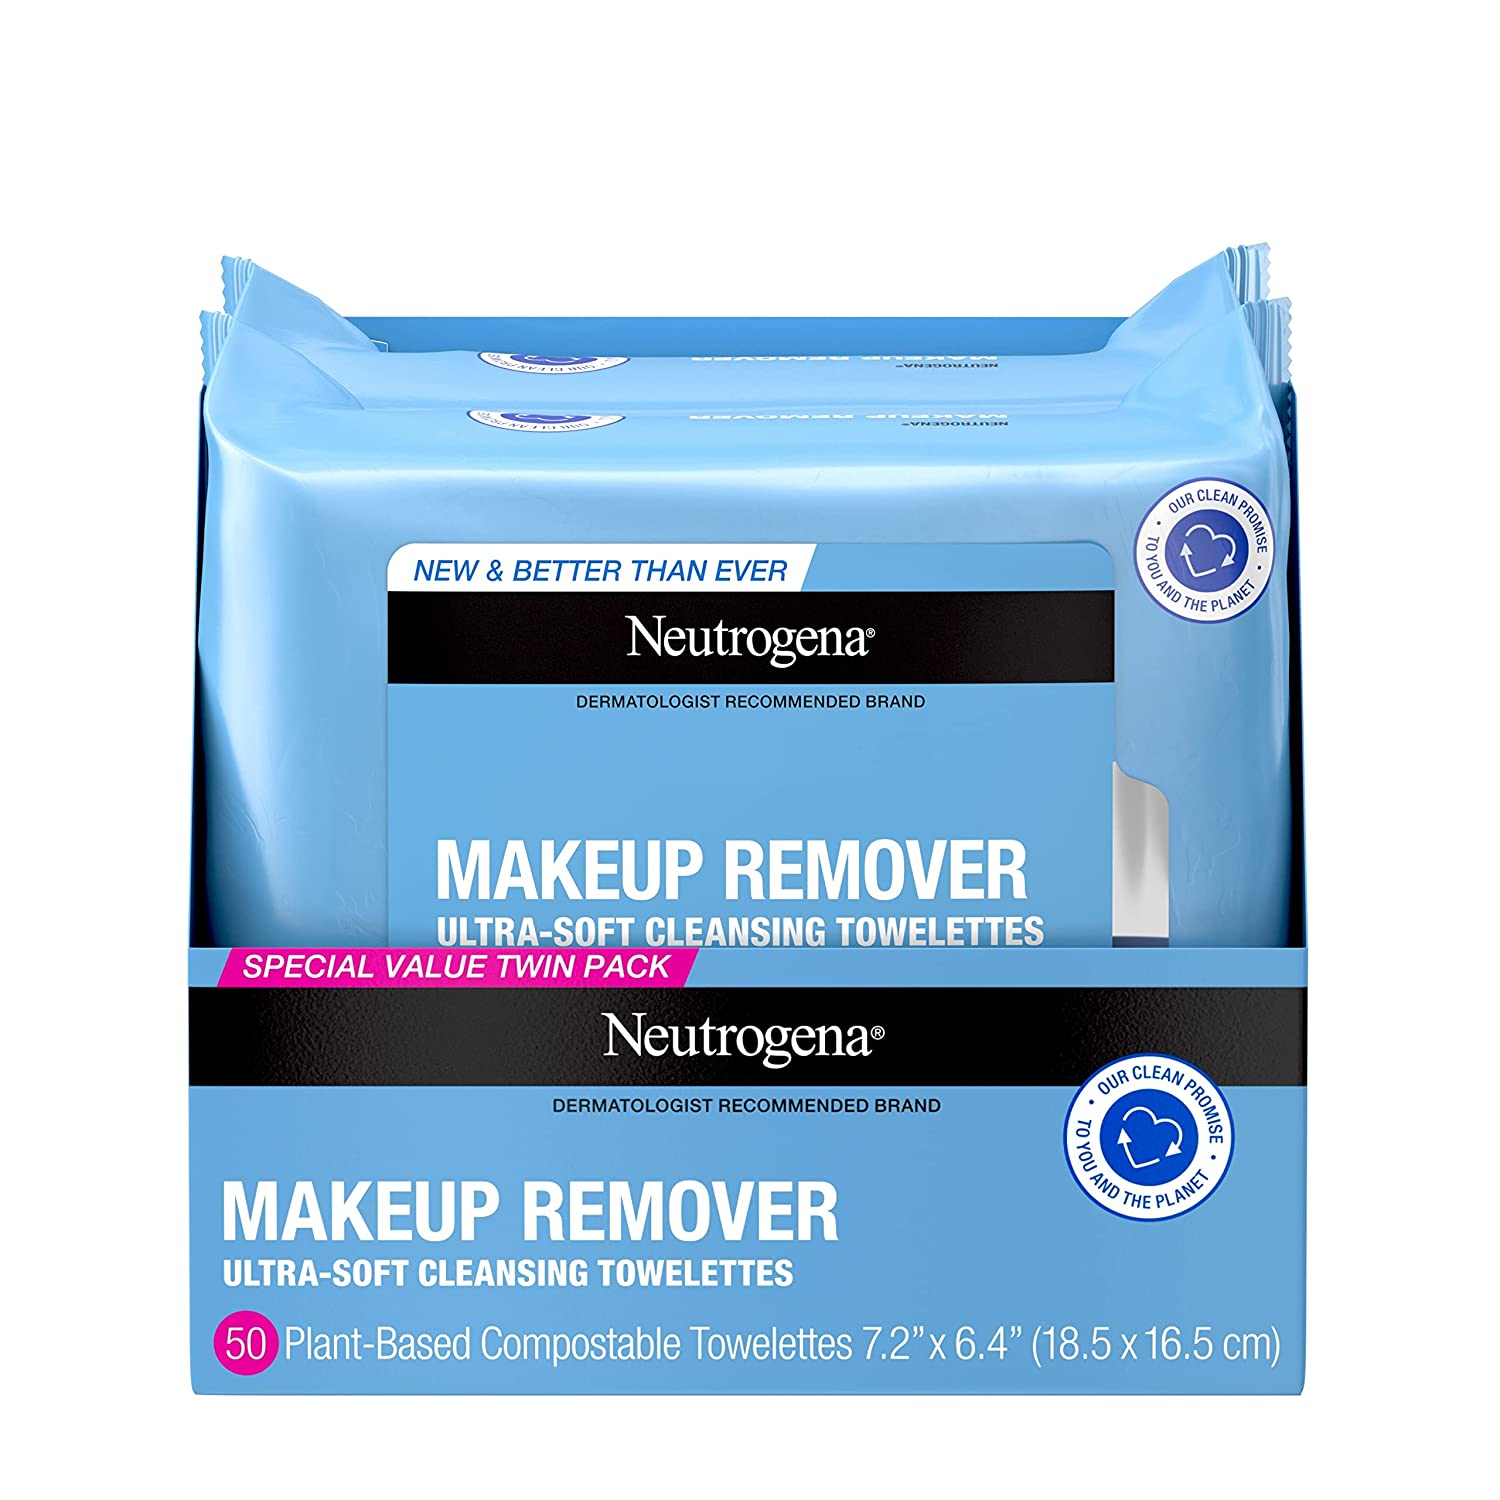 Neutrogena Compostable Makeup Remover Face Wipes, 50-Count